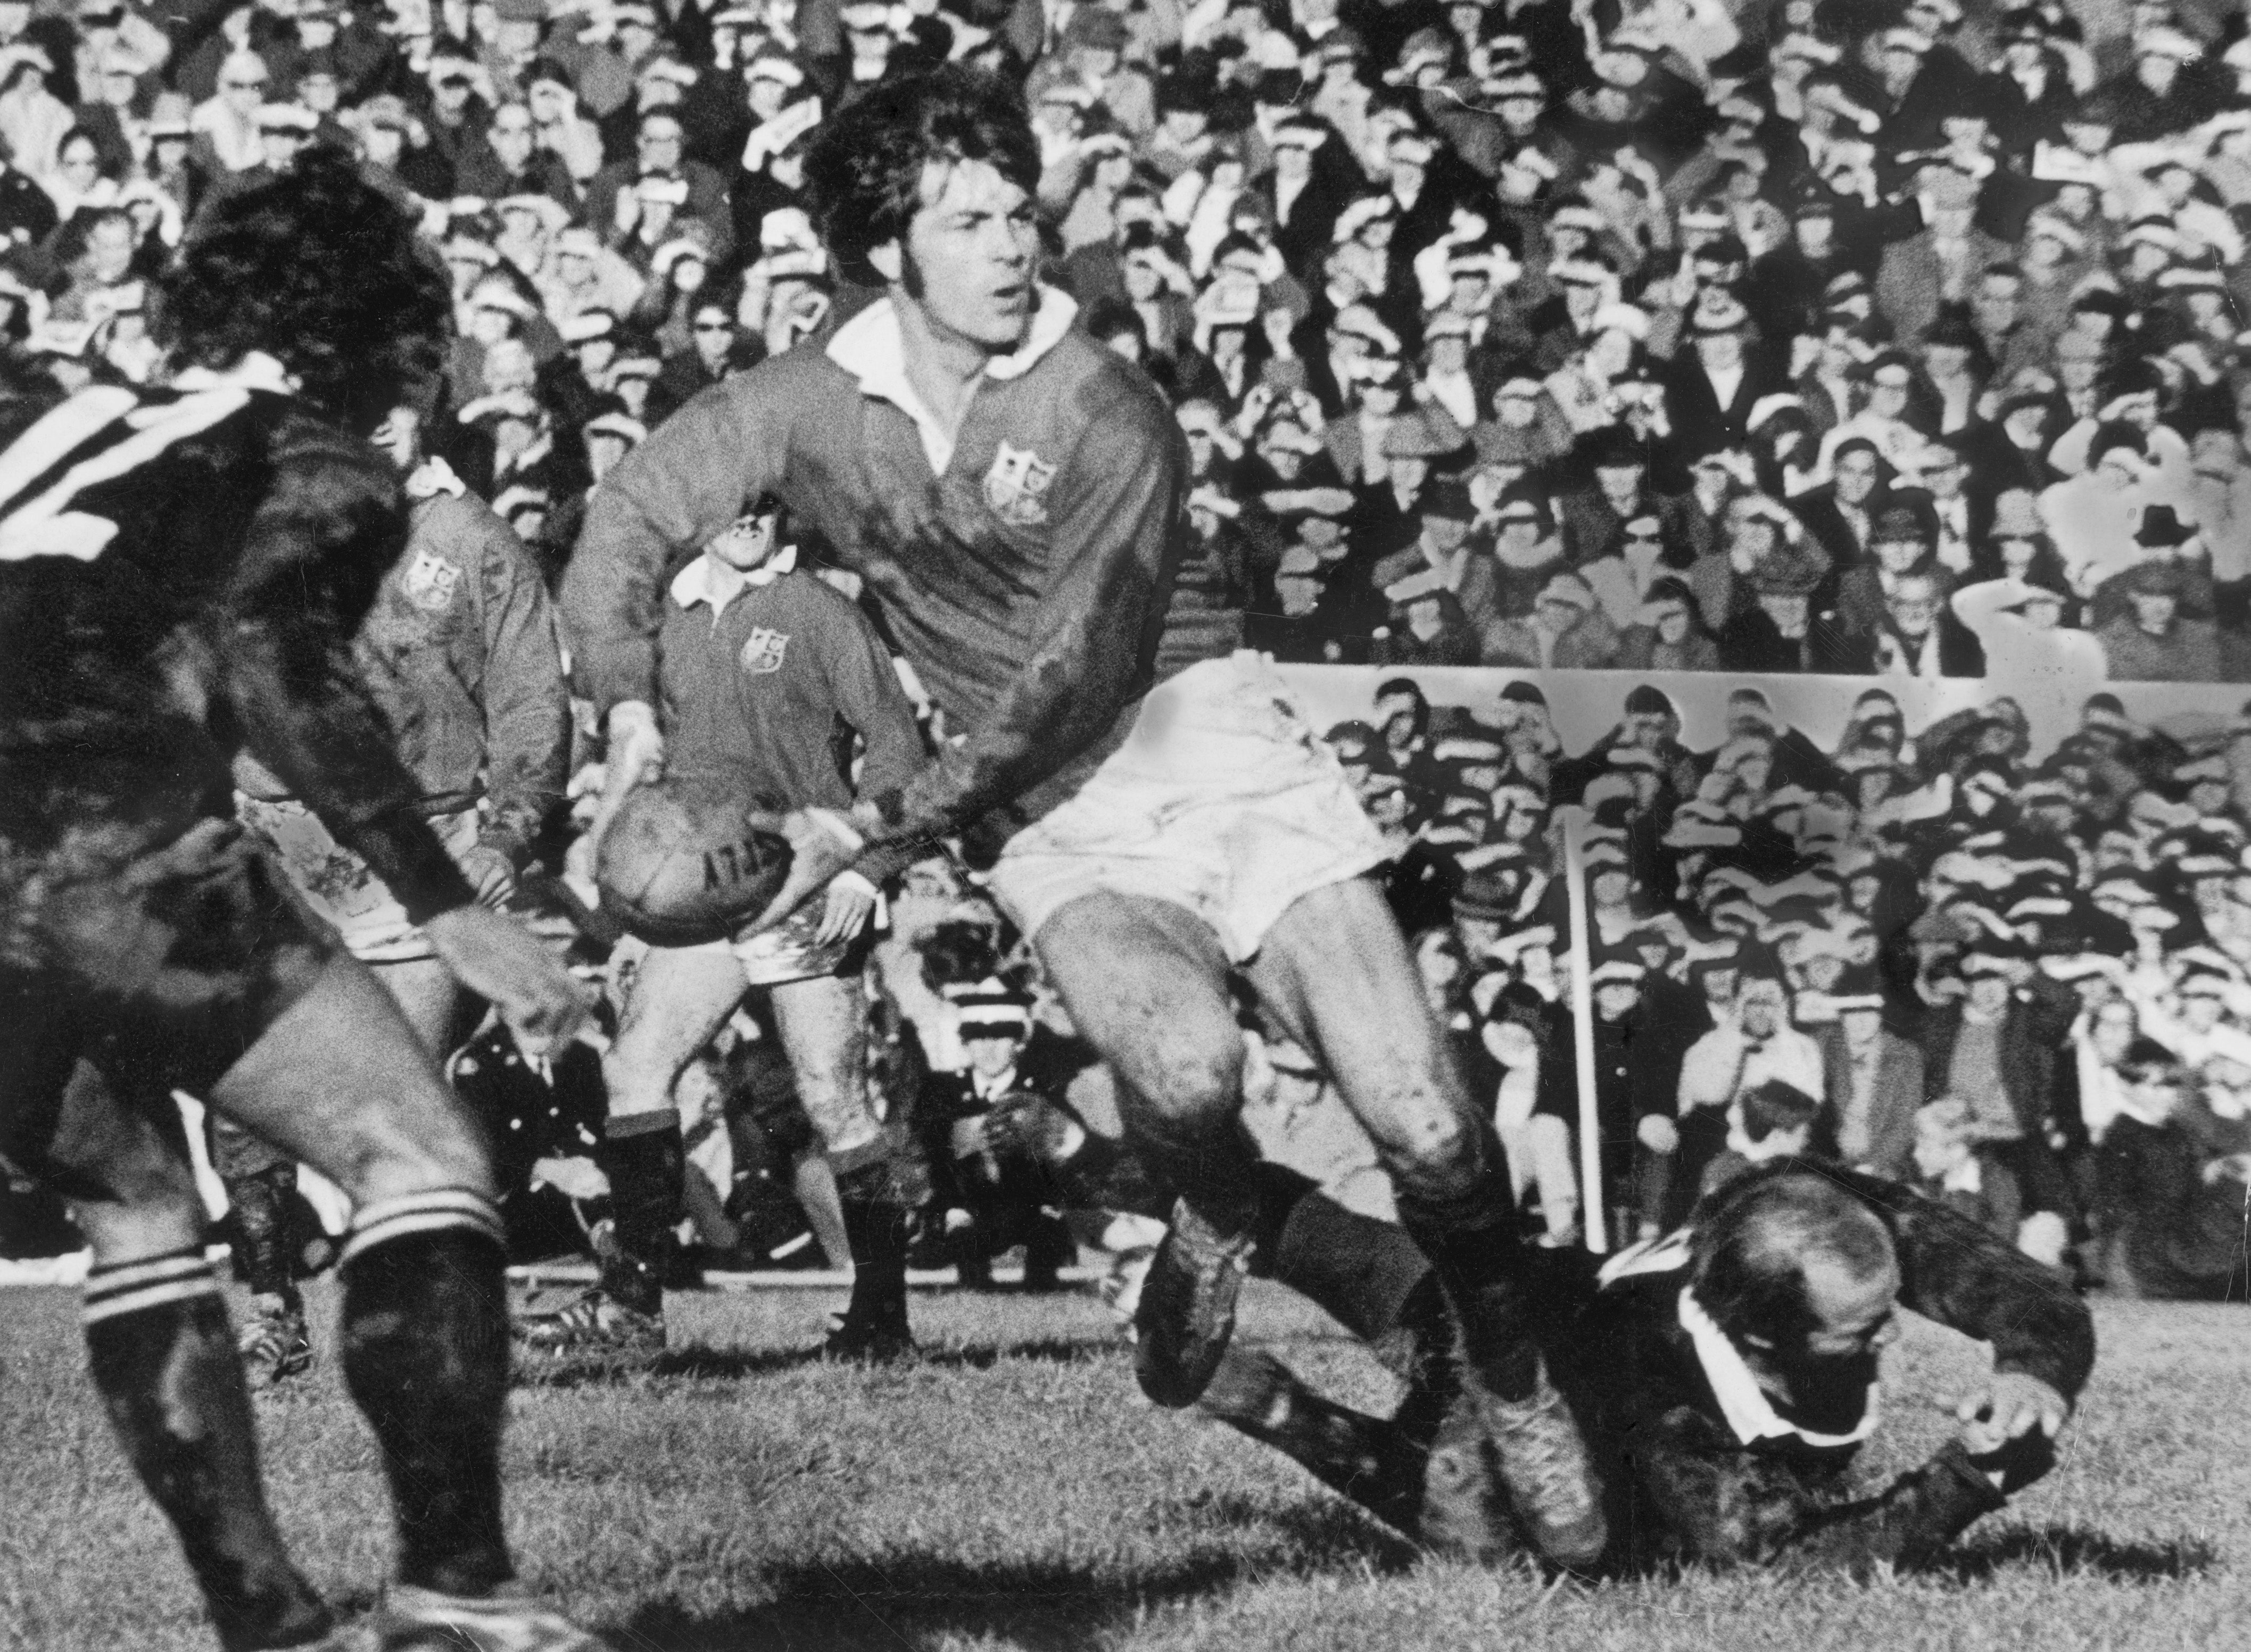 Barry John in action during the British Lions’ tour of New Zealand, 1971